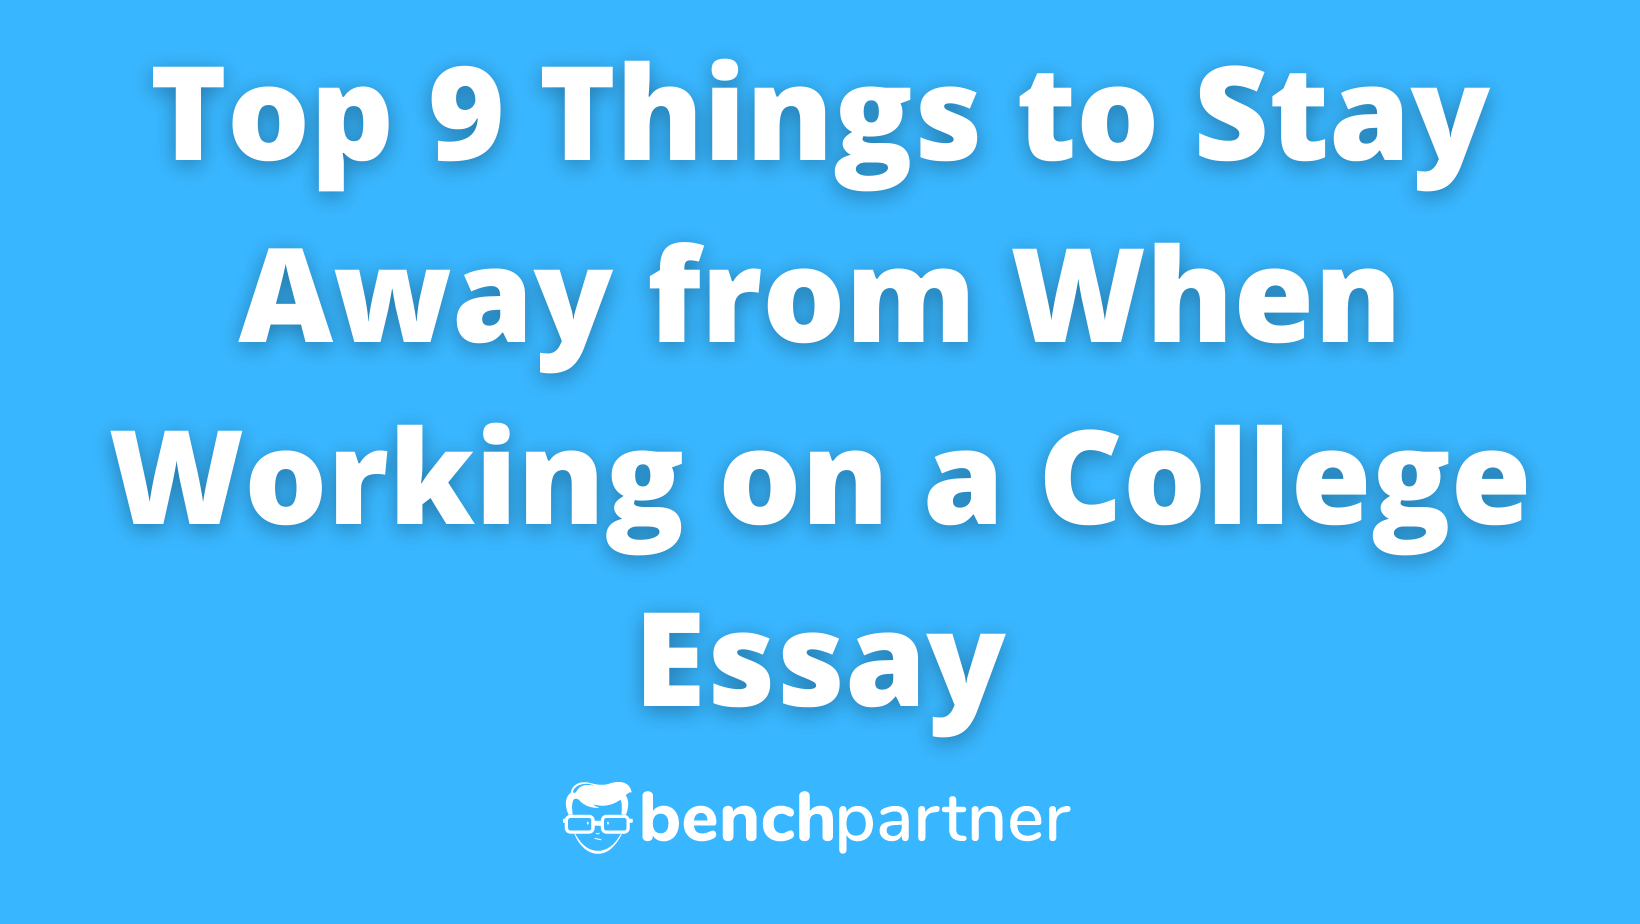 Top 9 Things to Stay Away from When Working on a College Essay